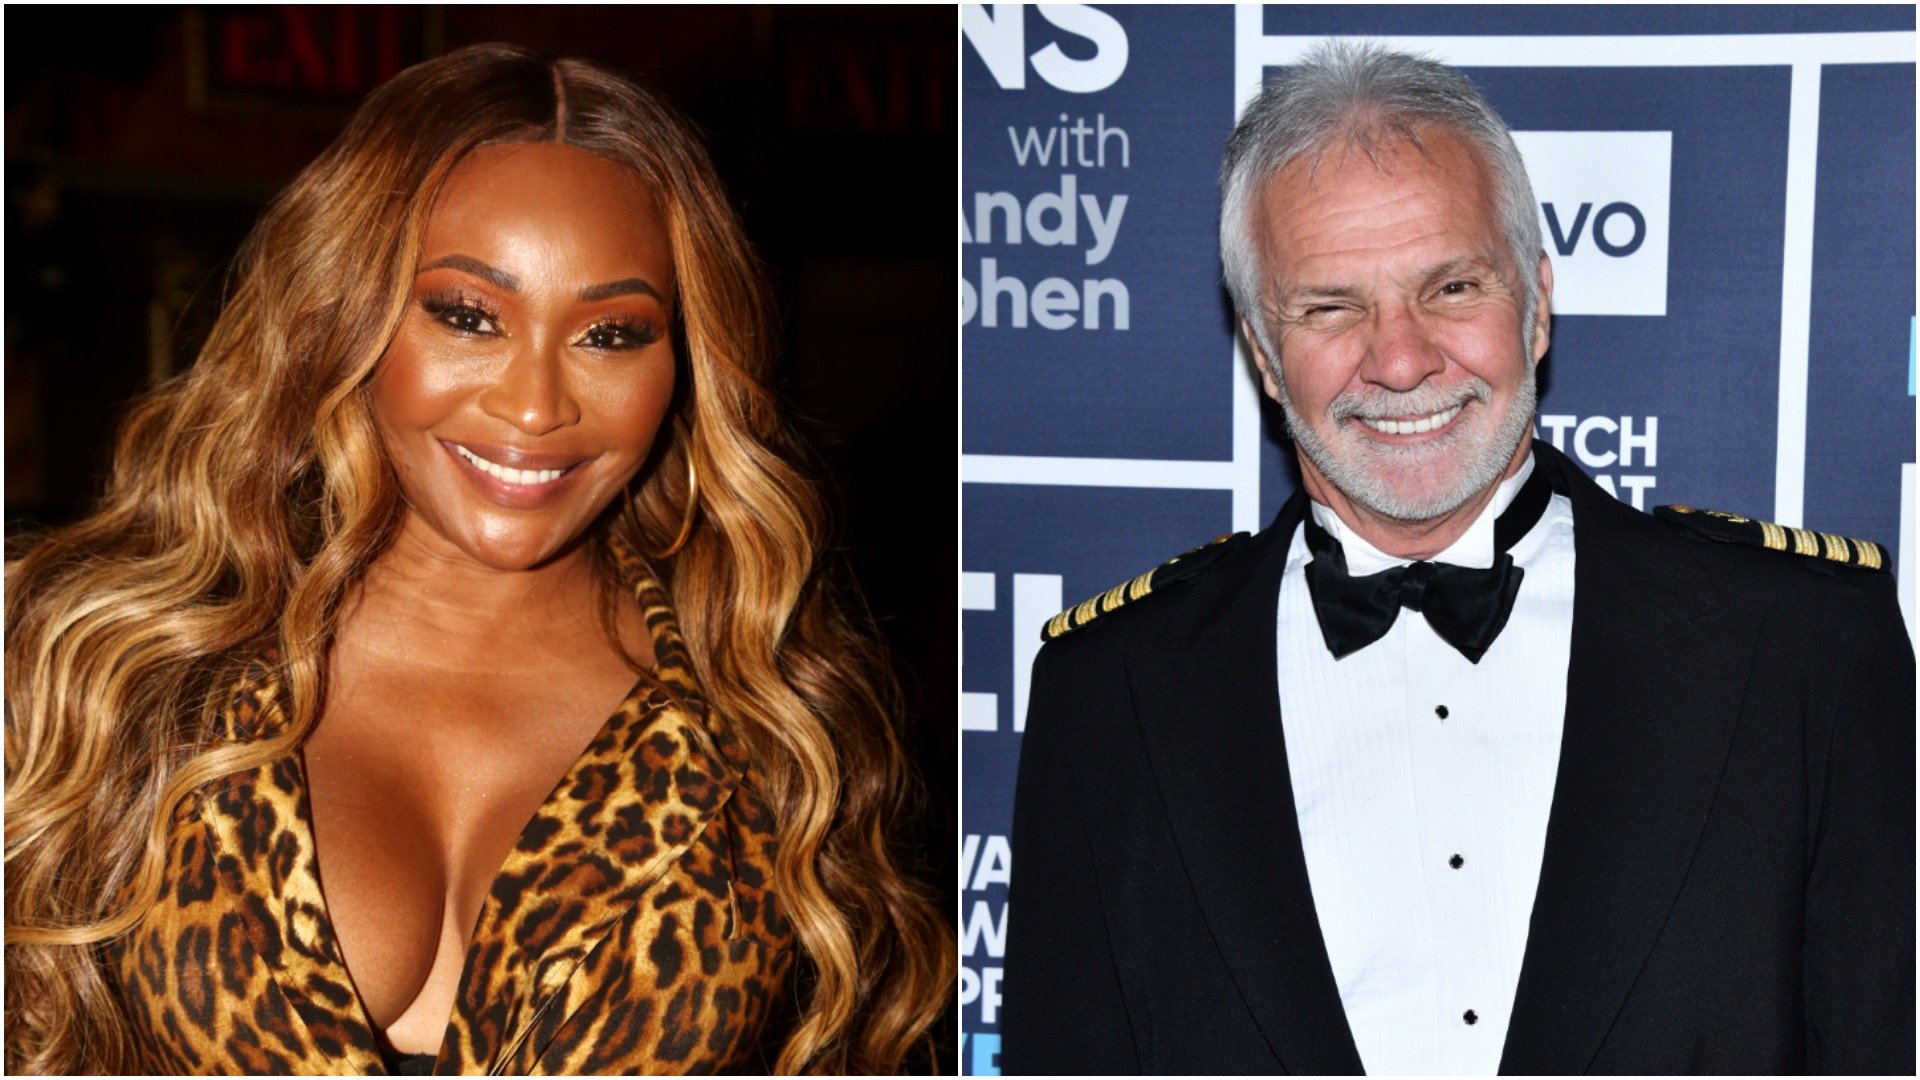 Cynthia Bailey from 'RHOA' attended a red carpet and Captain Lee Rosbach from 'Below Deck' attended a 'Below Deck' event in the 'WWHL' Clubhouse